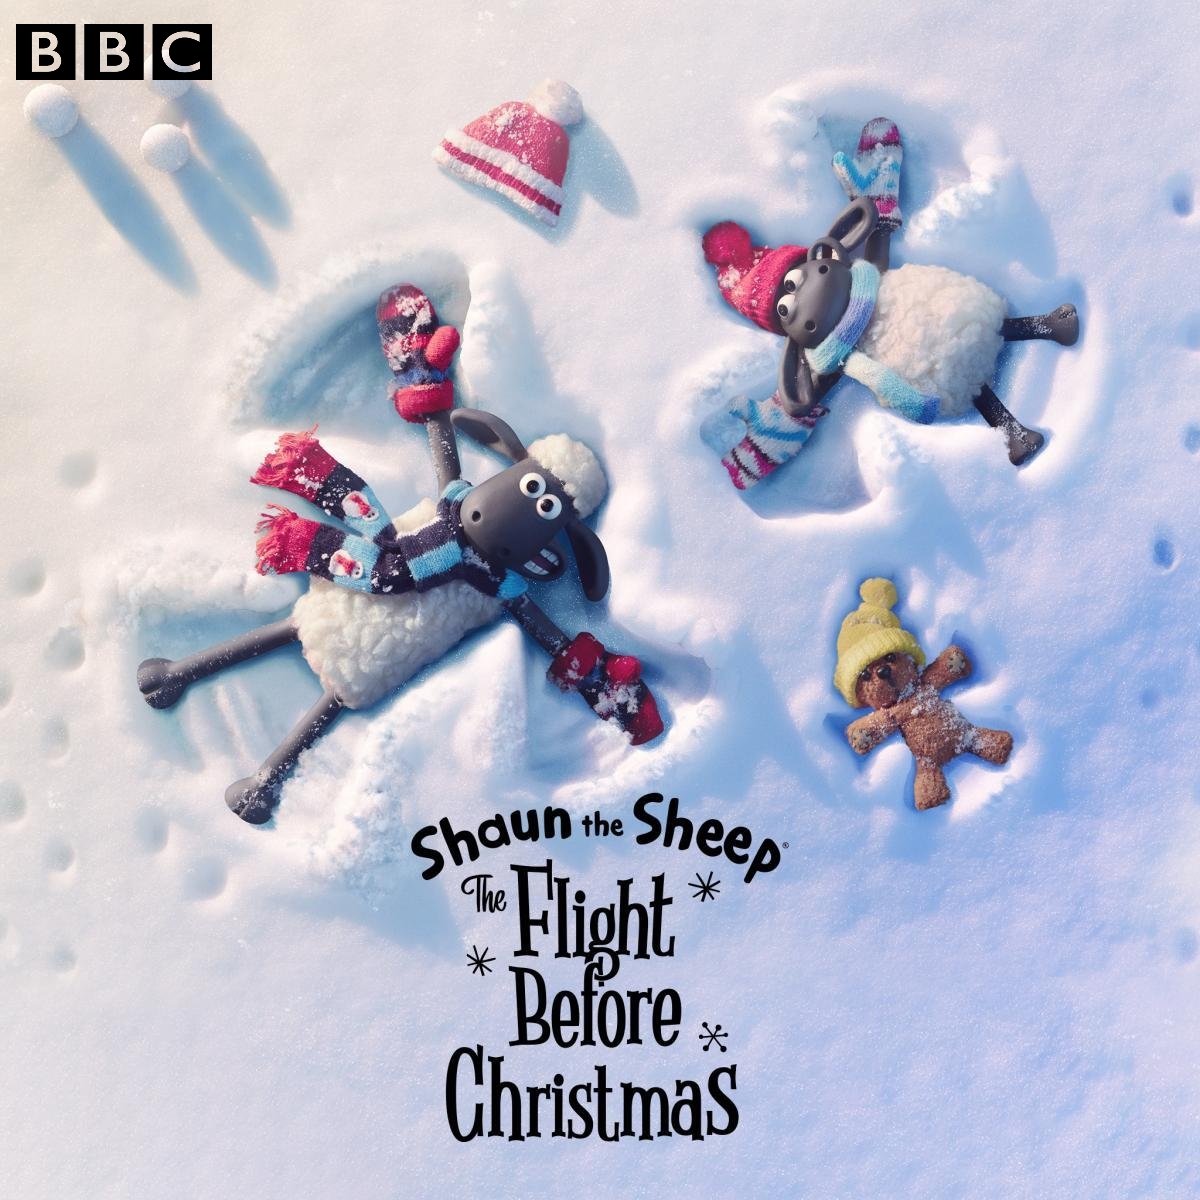 Where to watch Shaun the Sheep The Flight Before Christmas